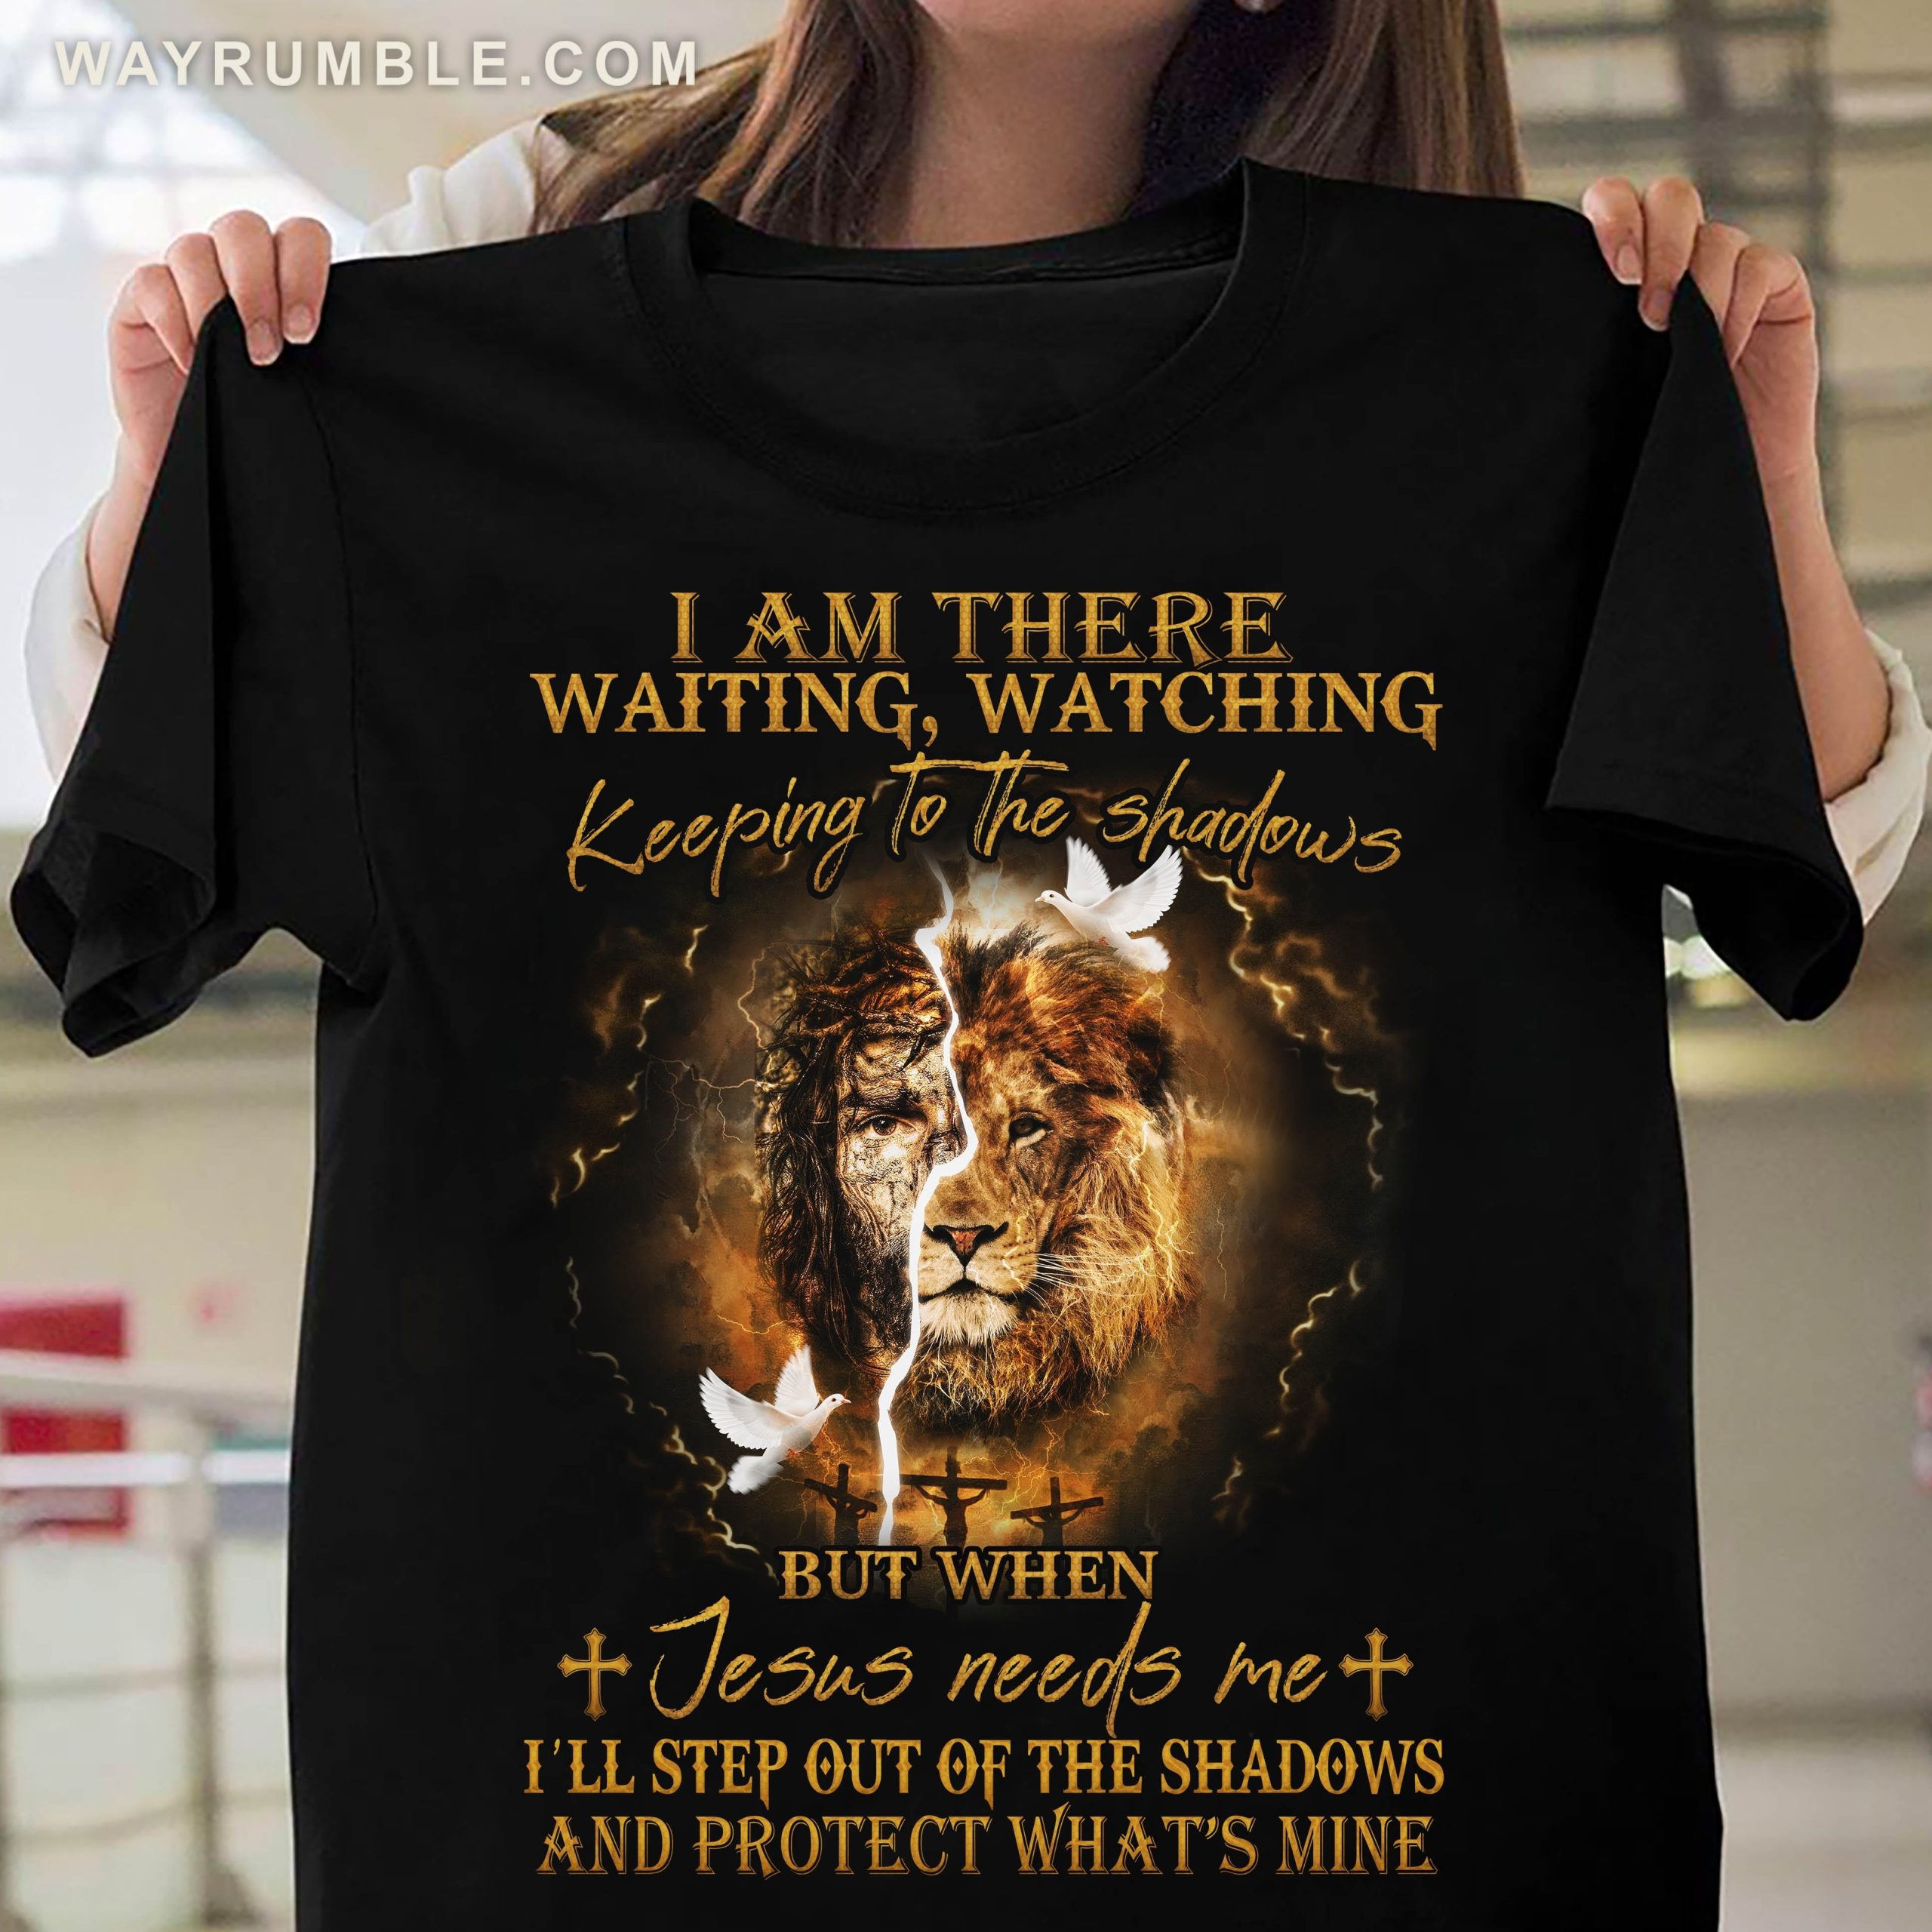 Lion of Judah, When Jesus needs me, I’ll step out and protect what’s mine – Jesus T Shirt